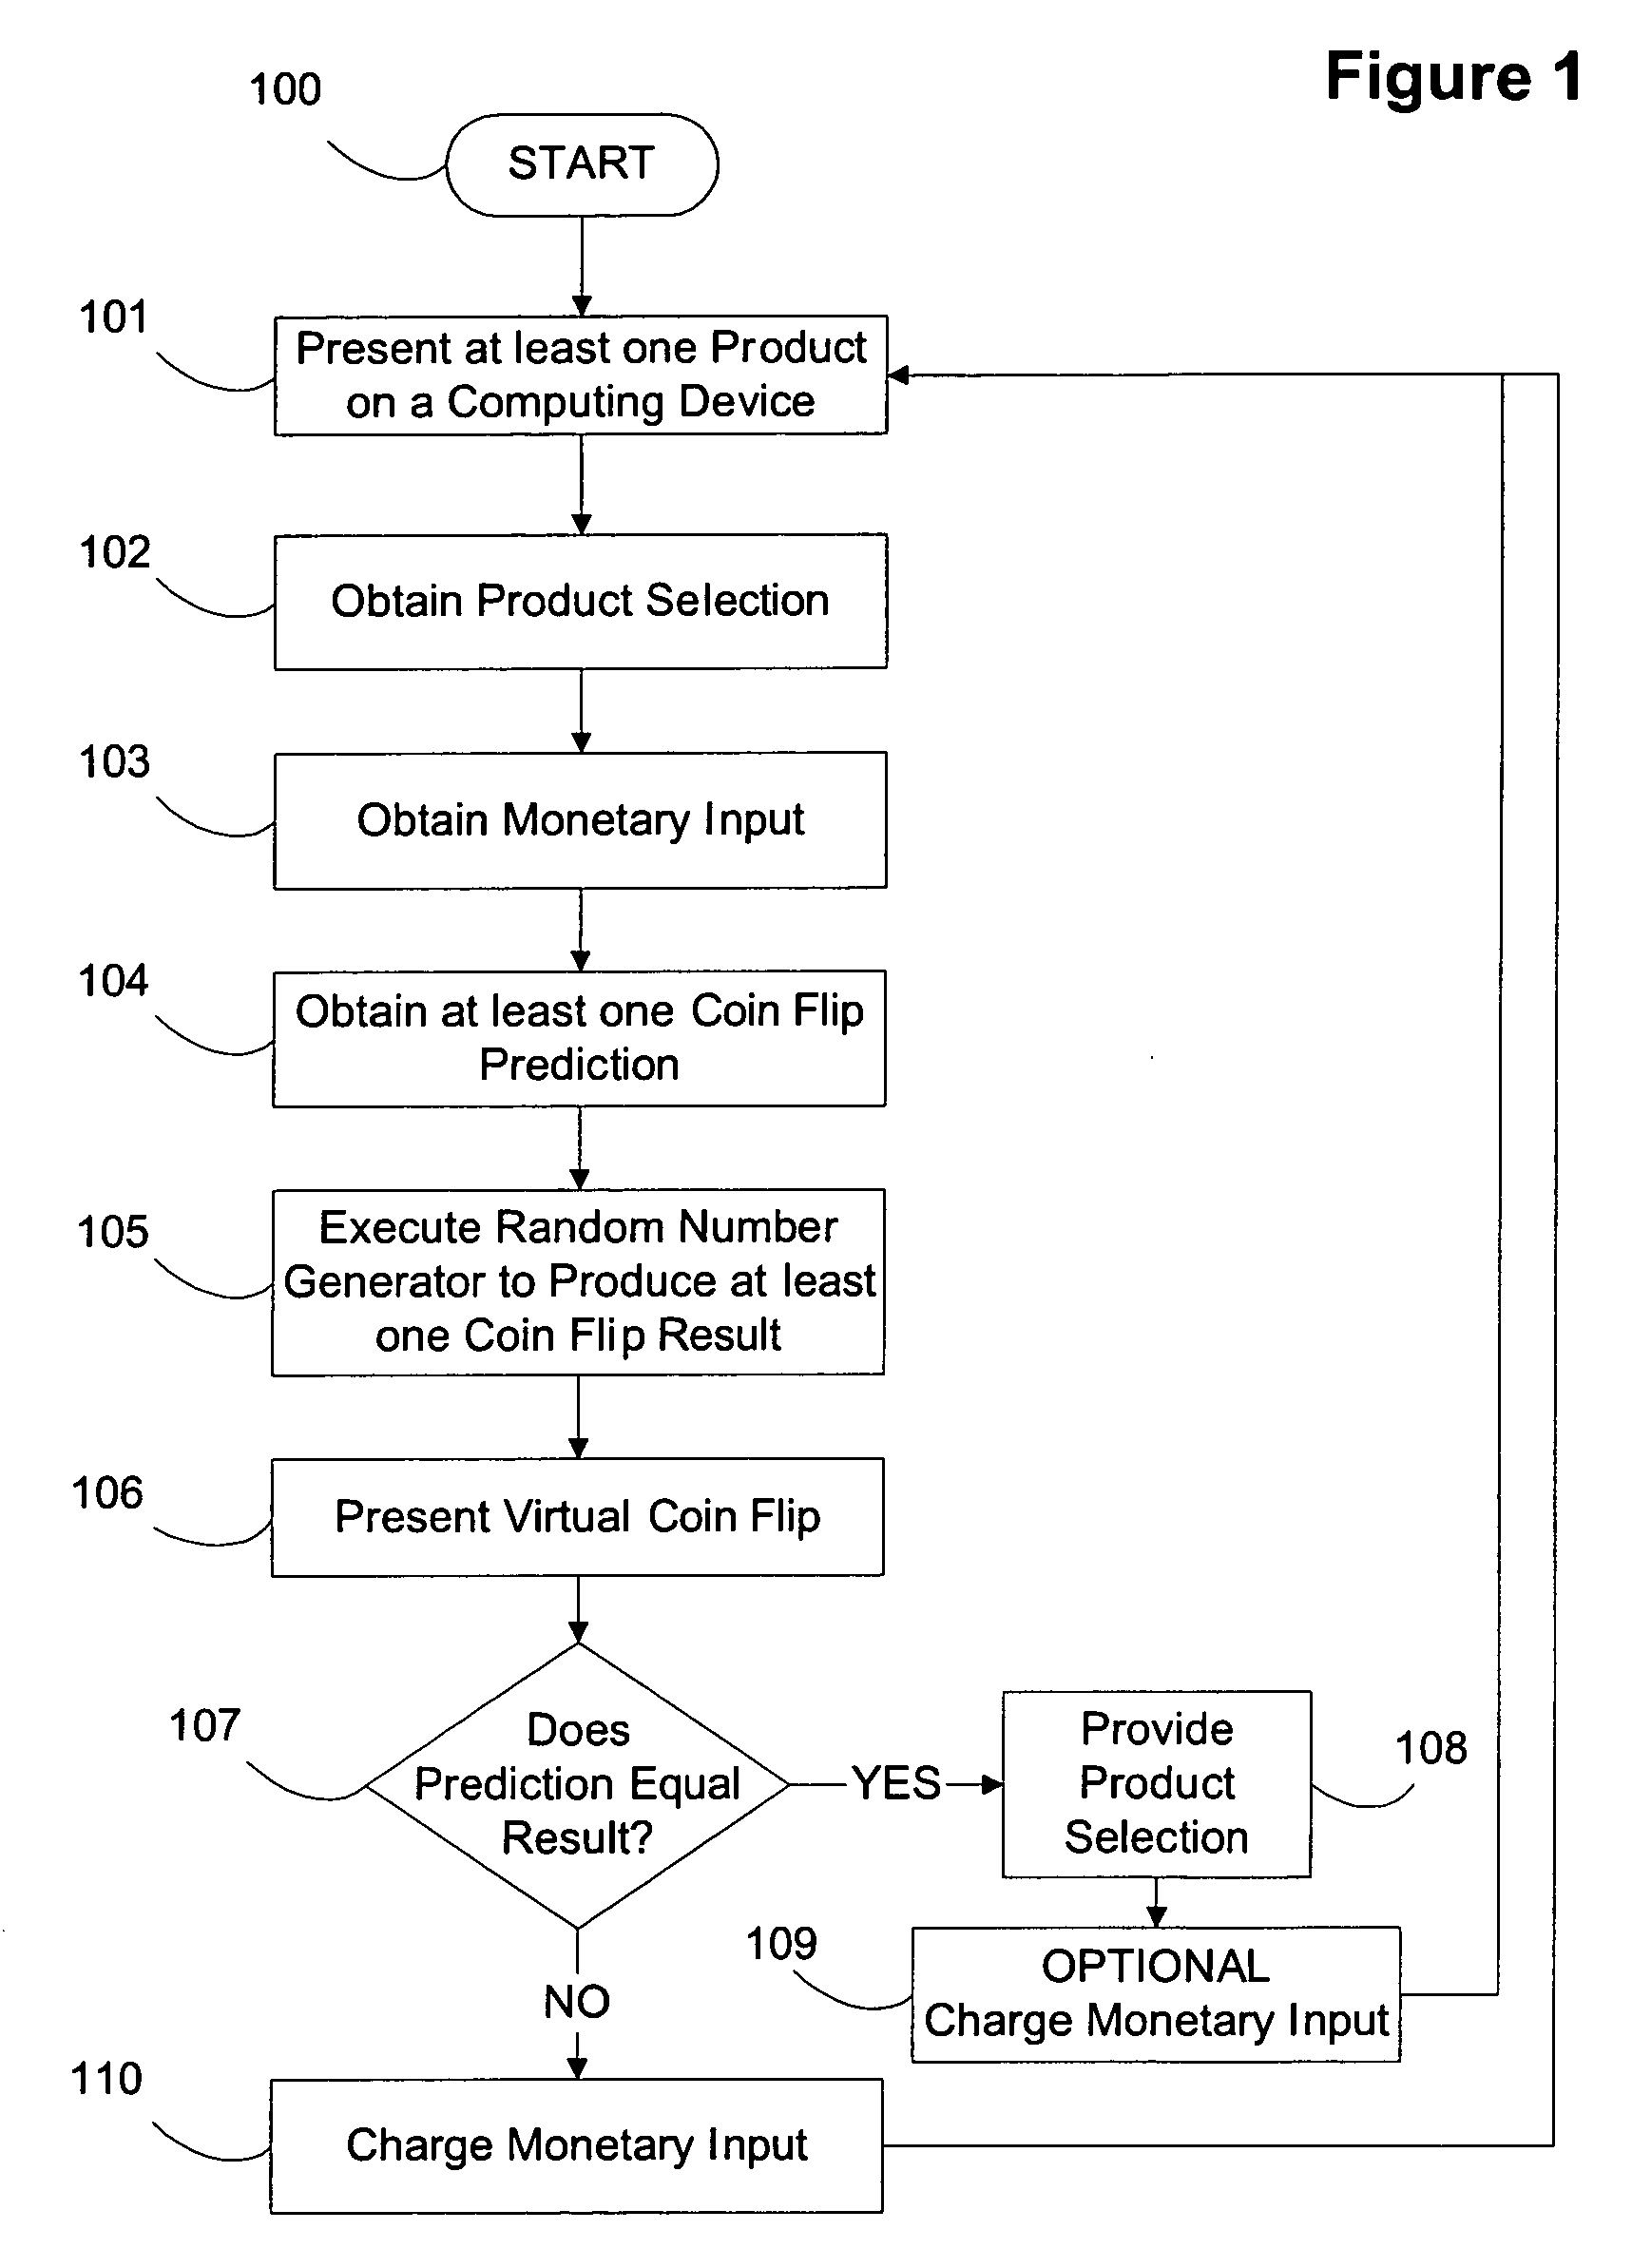 Method for completing an electronic commerce transaction based on a virtual coin flip